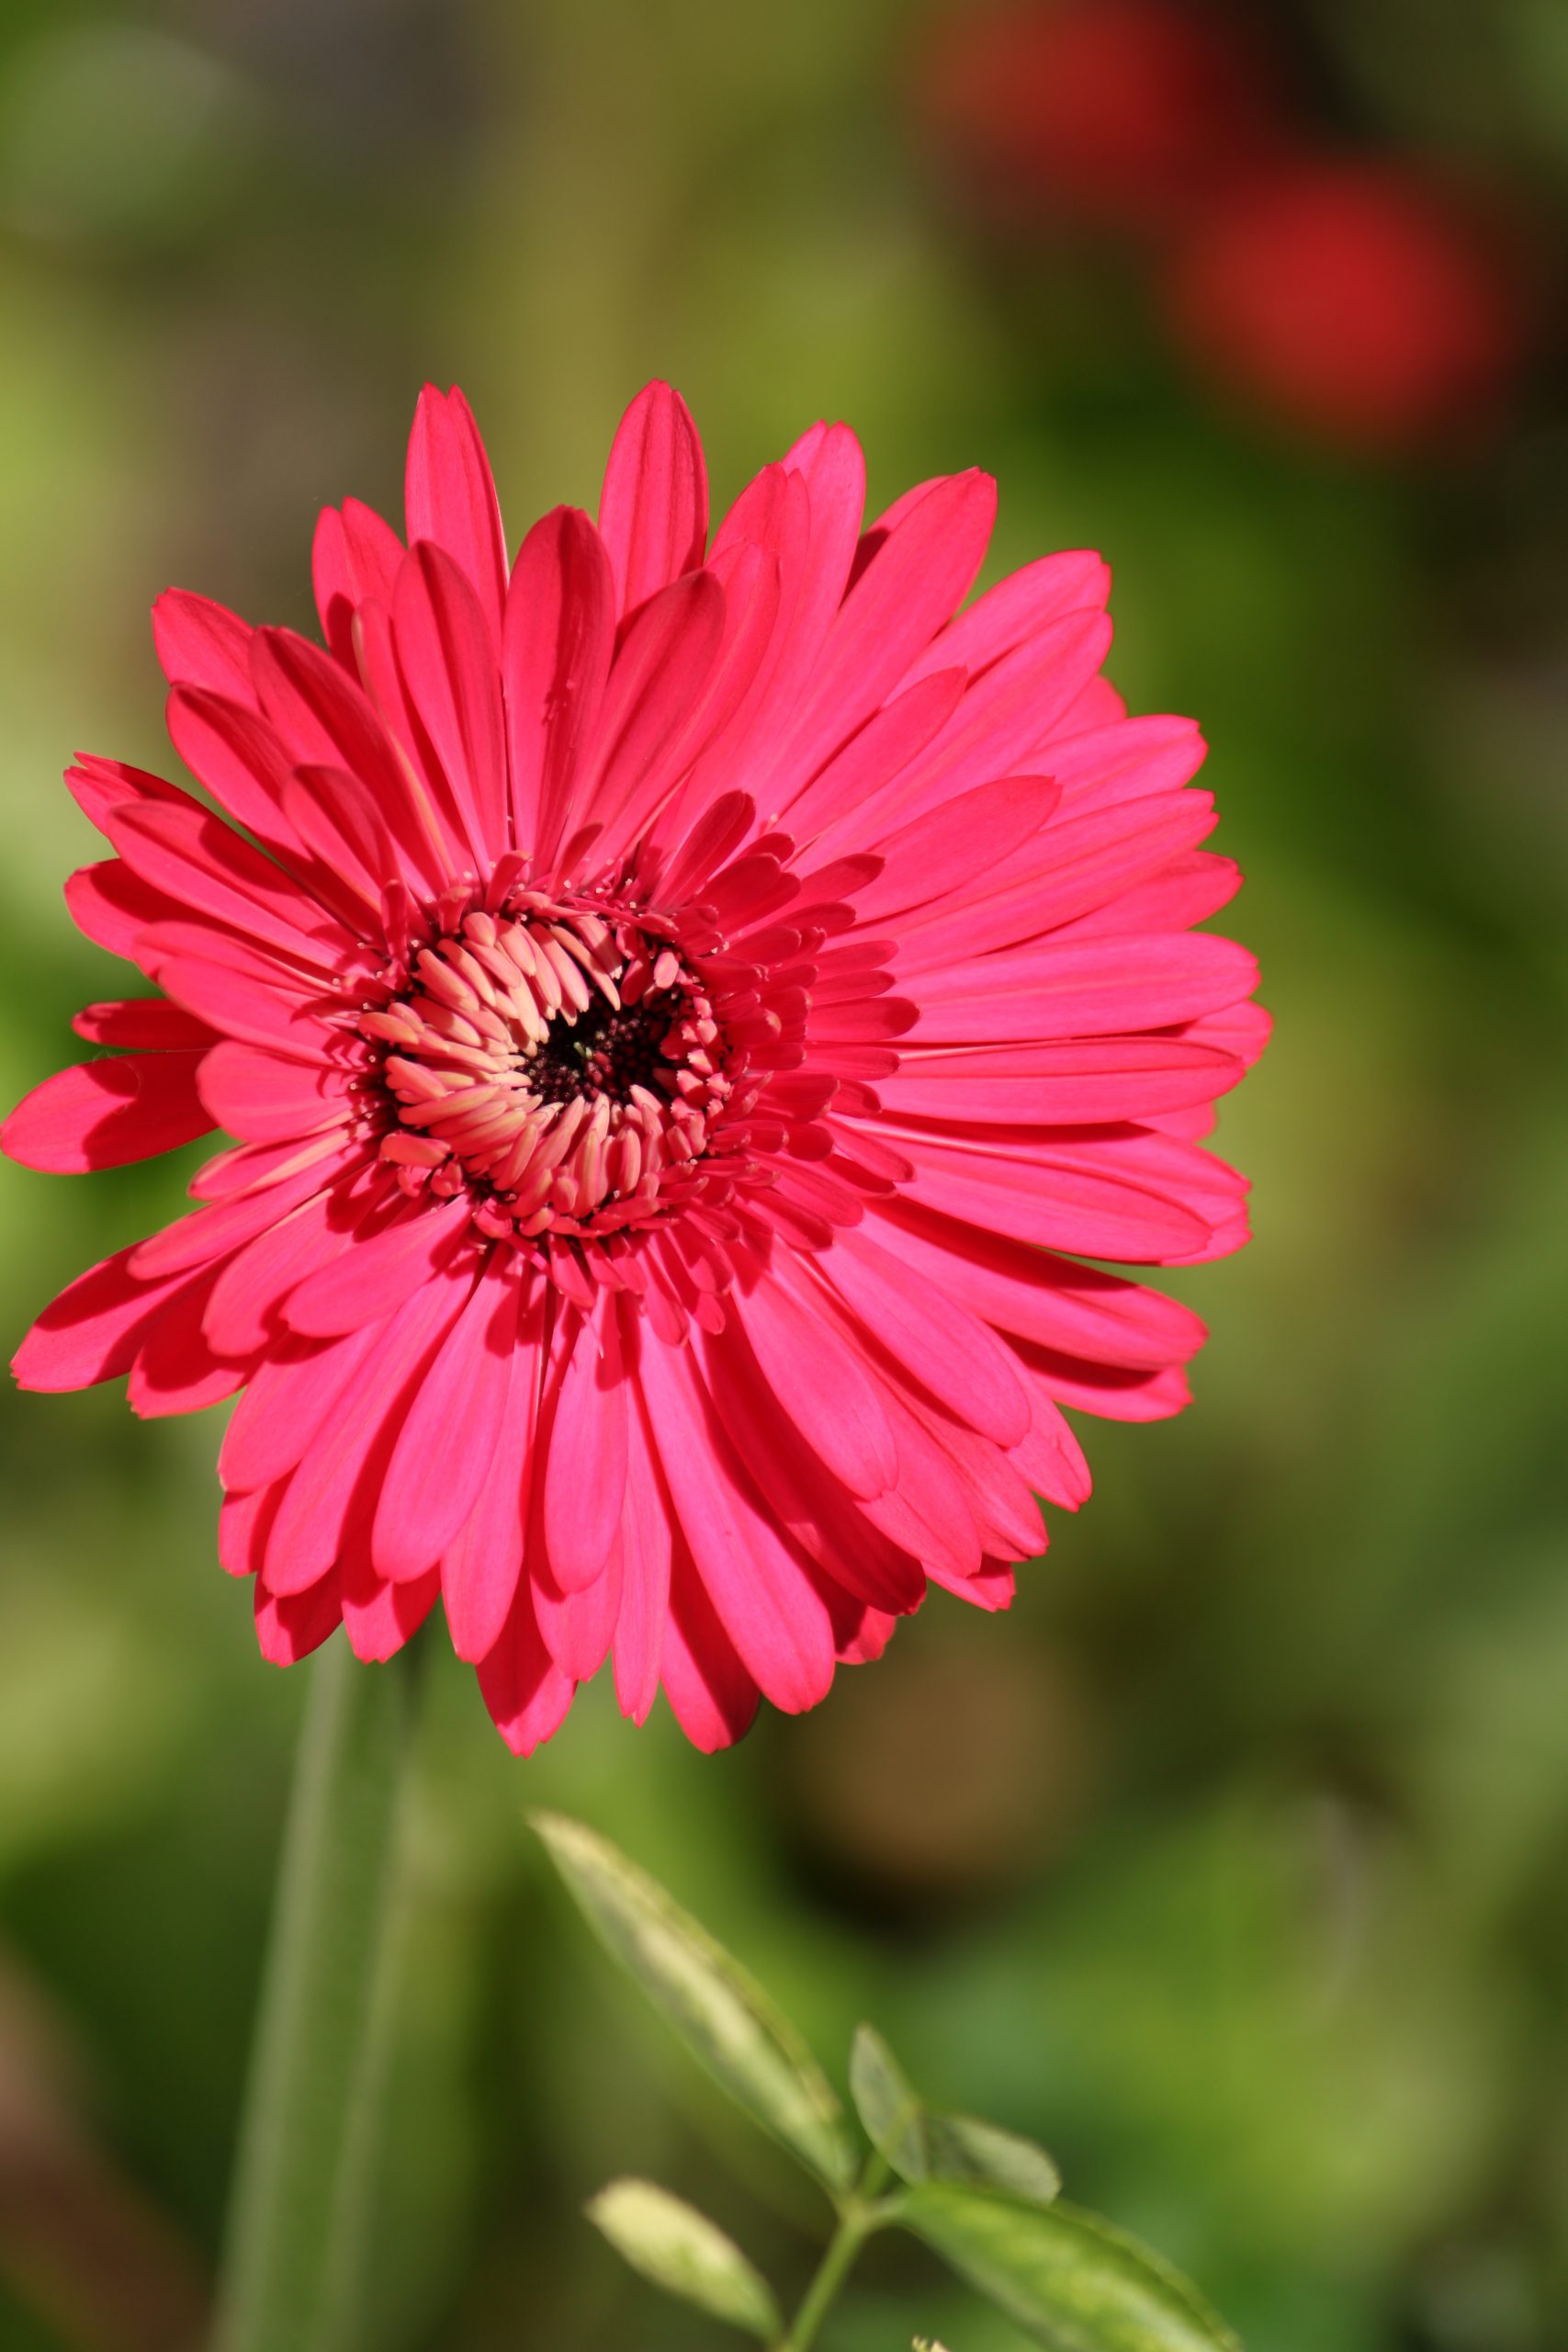 A red flower